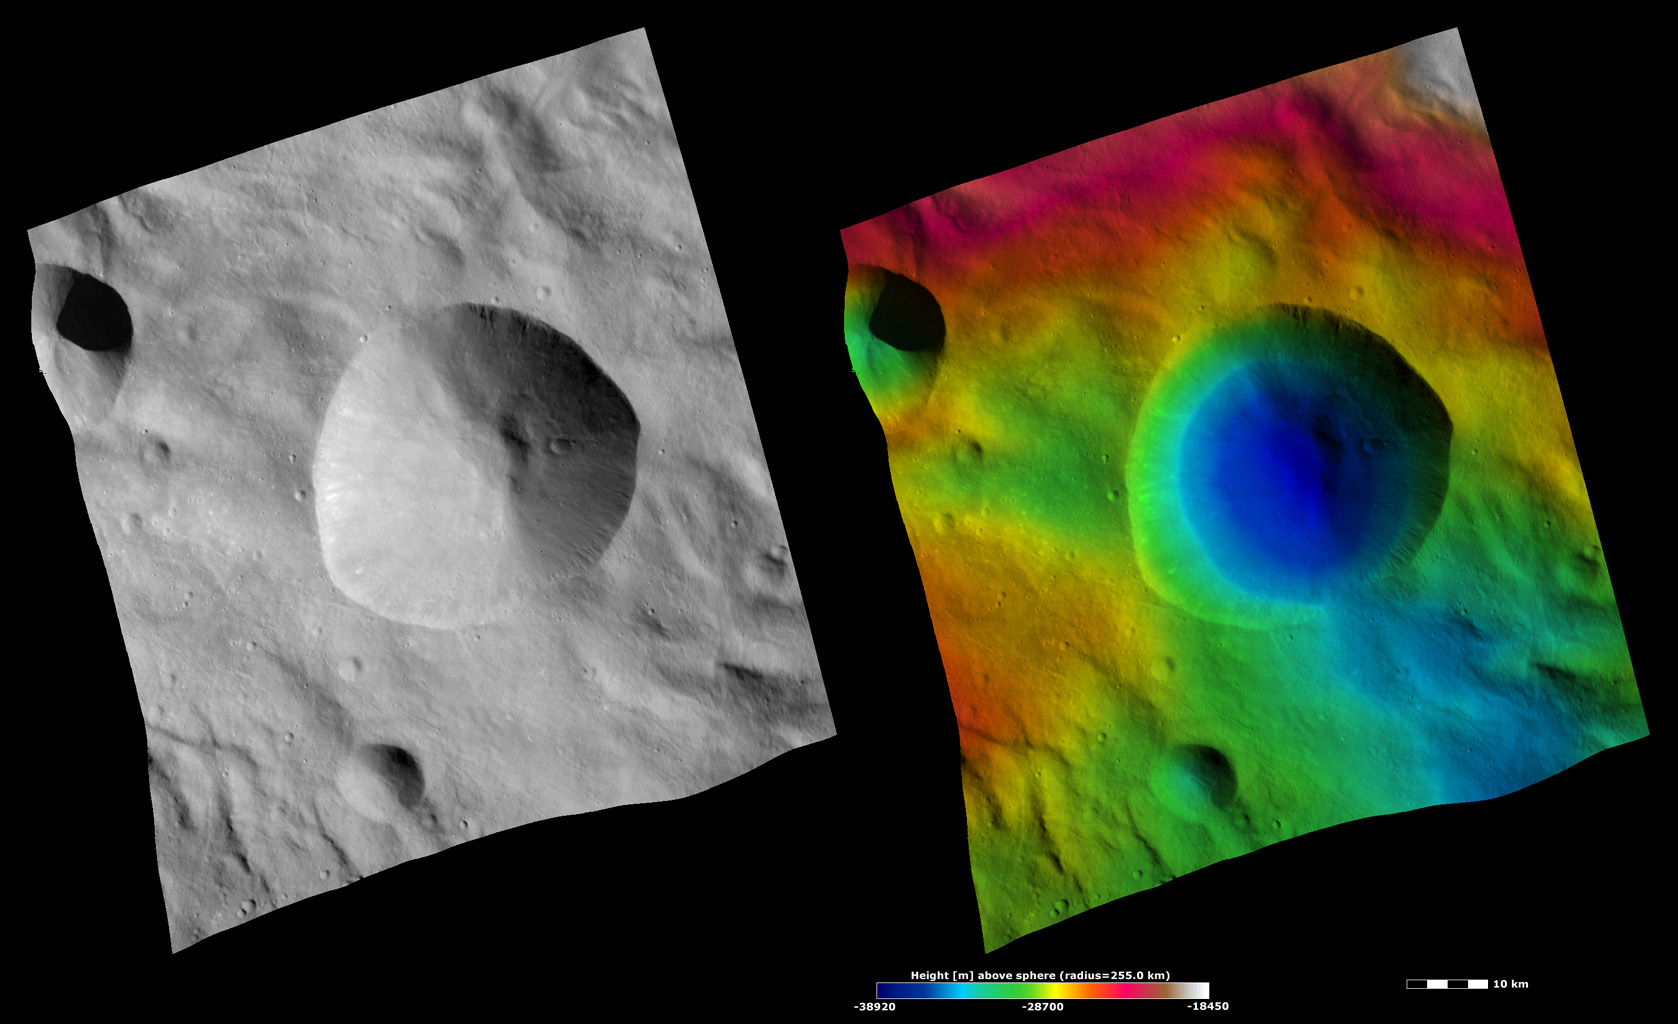 Apparent Brightness and Topography Images of Tarpeia Crater